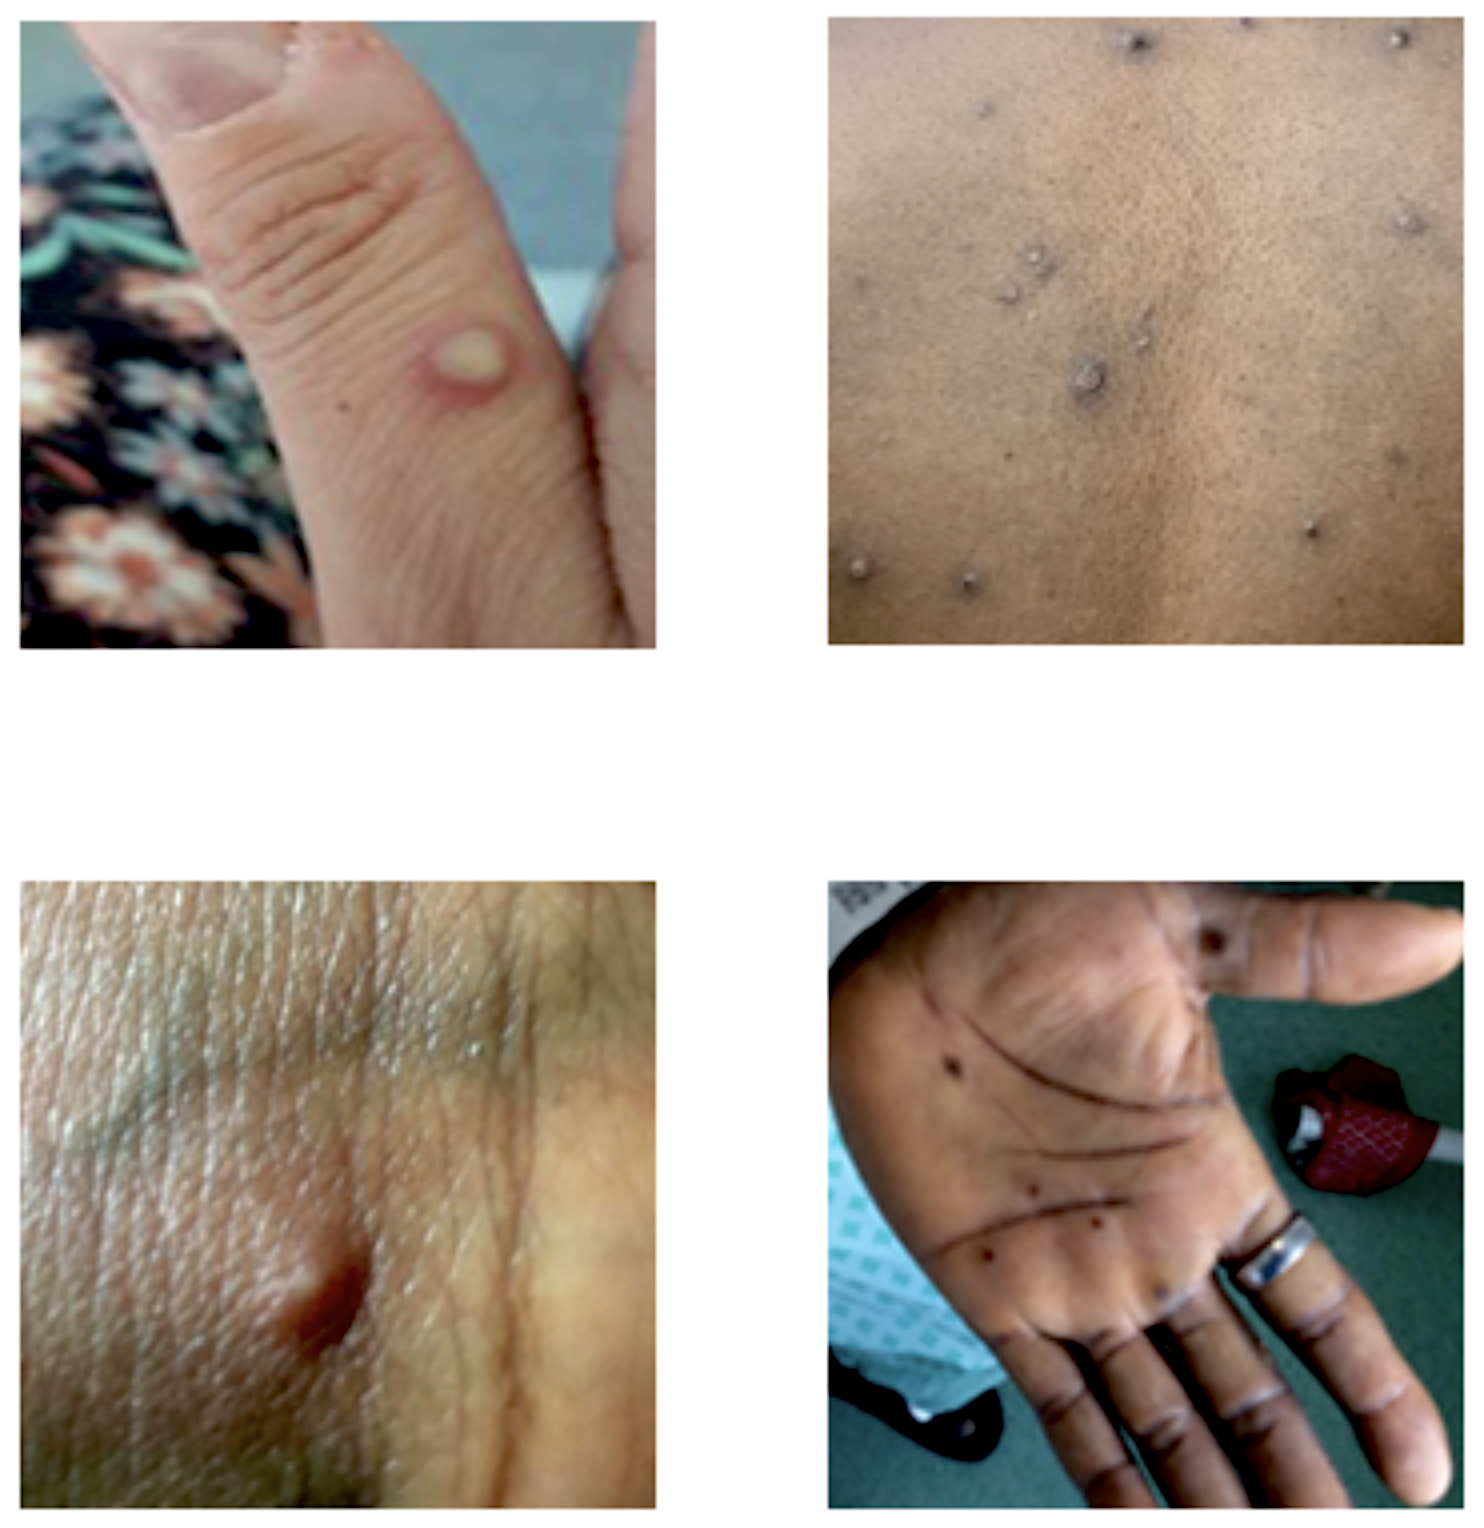 Images of monkeypox on skin surfaces